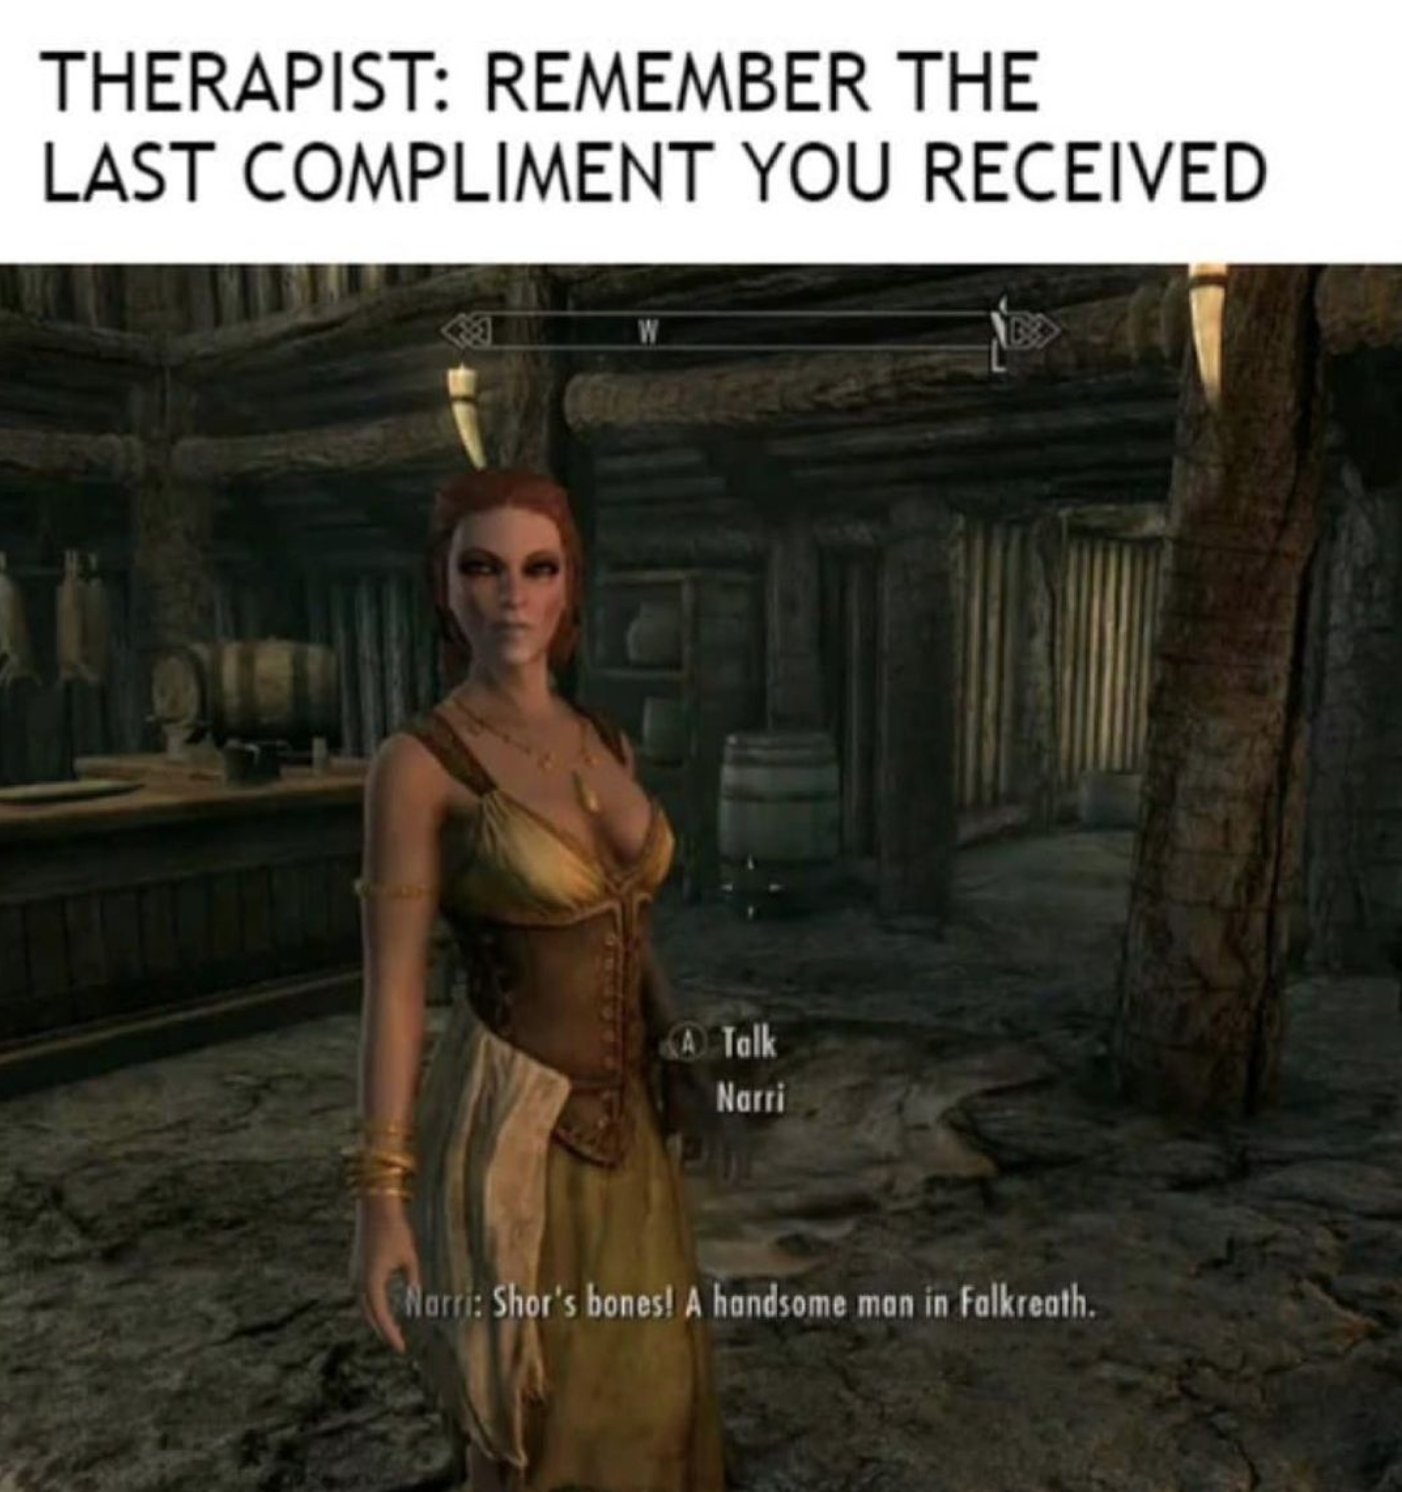 funny gaming memes - pc game - Therapist Remember The Last Compliment You Received A Tolk Nomi Marti Shor's bones! A handsome man in Falkreath.